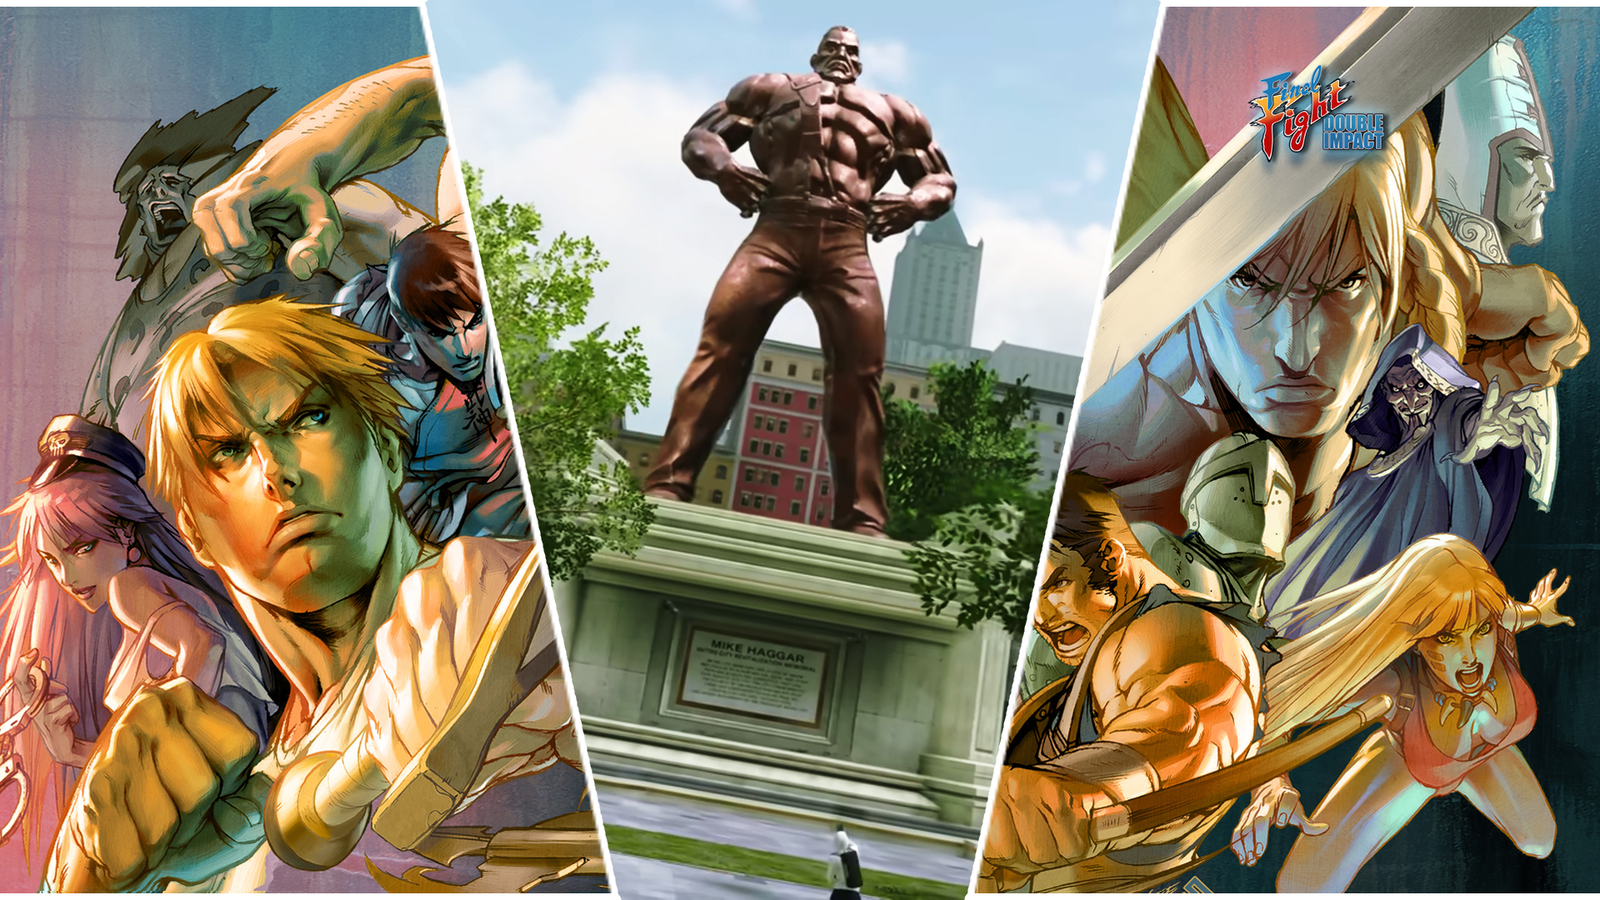 Should Capcom use a Street Fighter 4 original character as Street